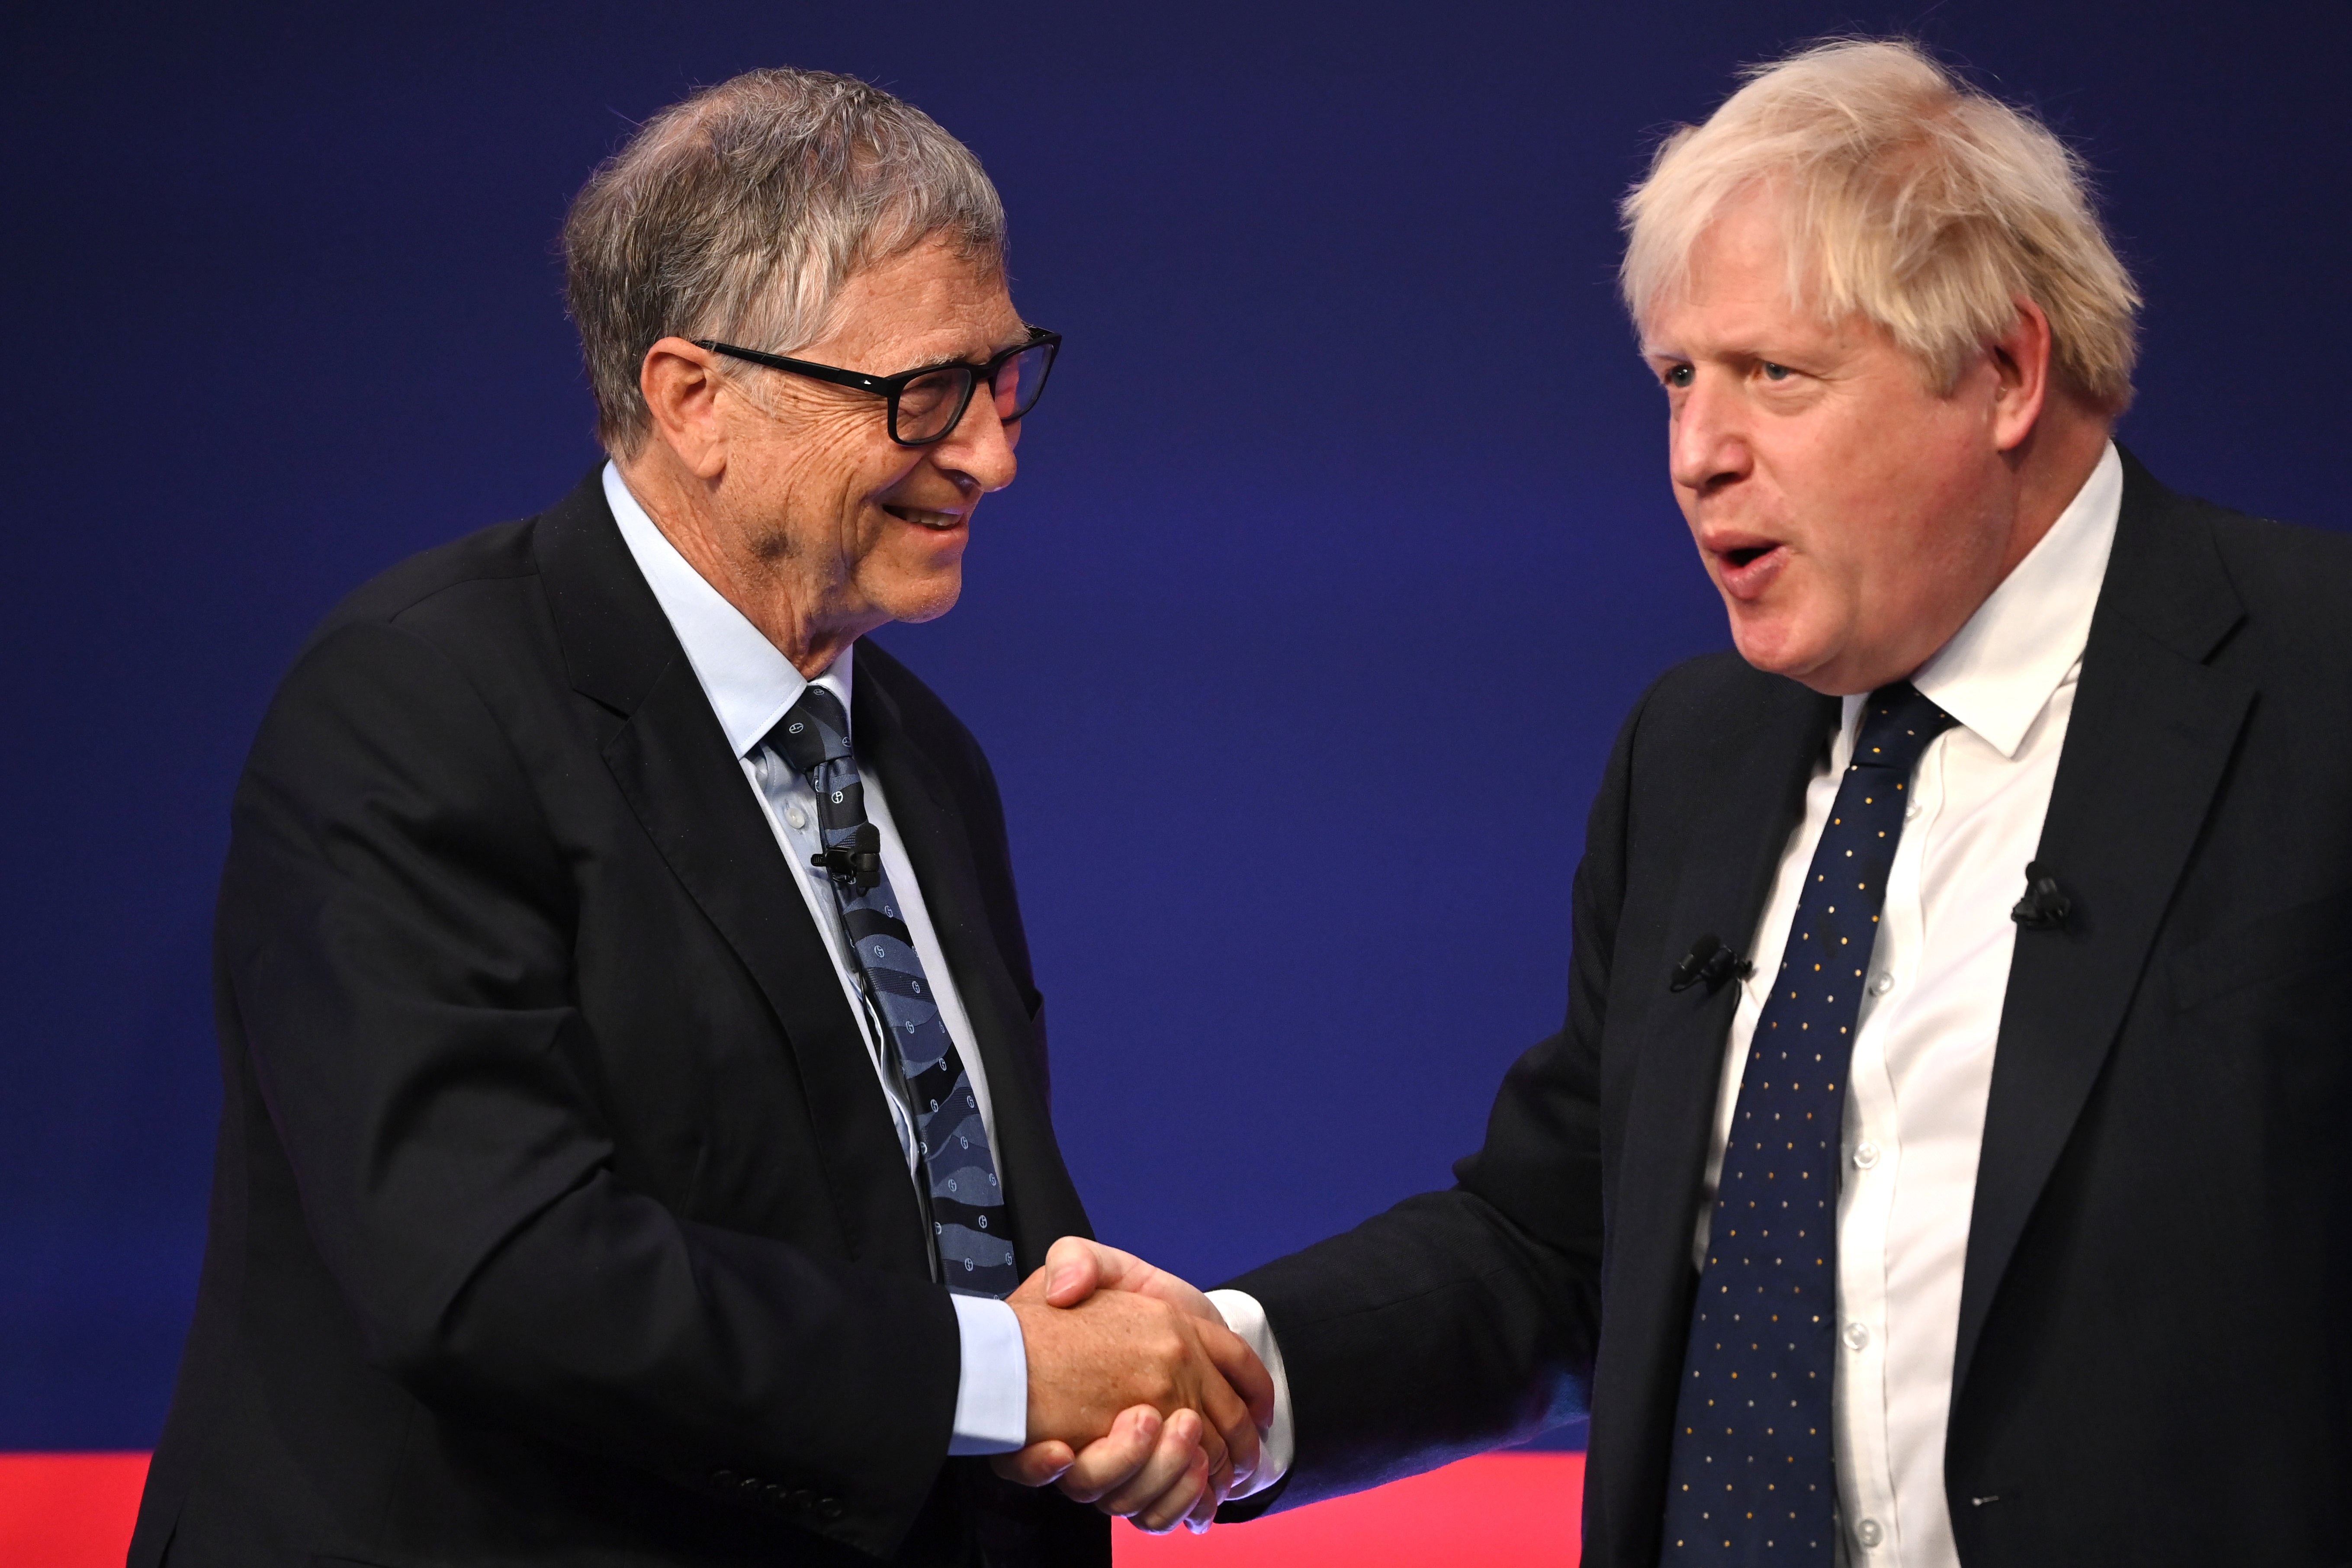 Prime Minister Boris Johnson with American businessman Bill Gates during the Global Investment Summit. Leon Neal/PA